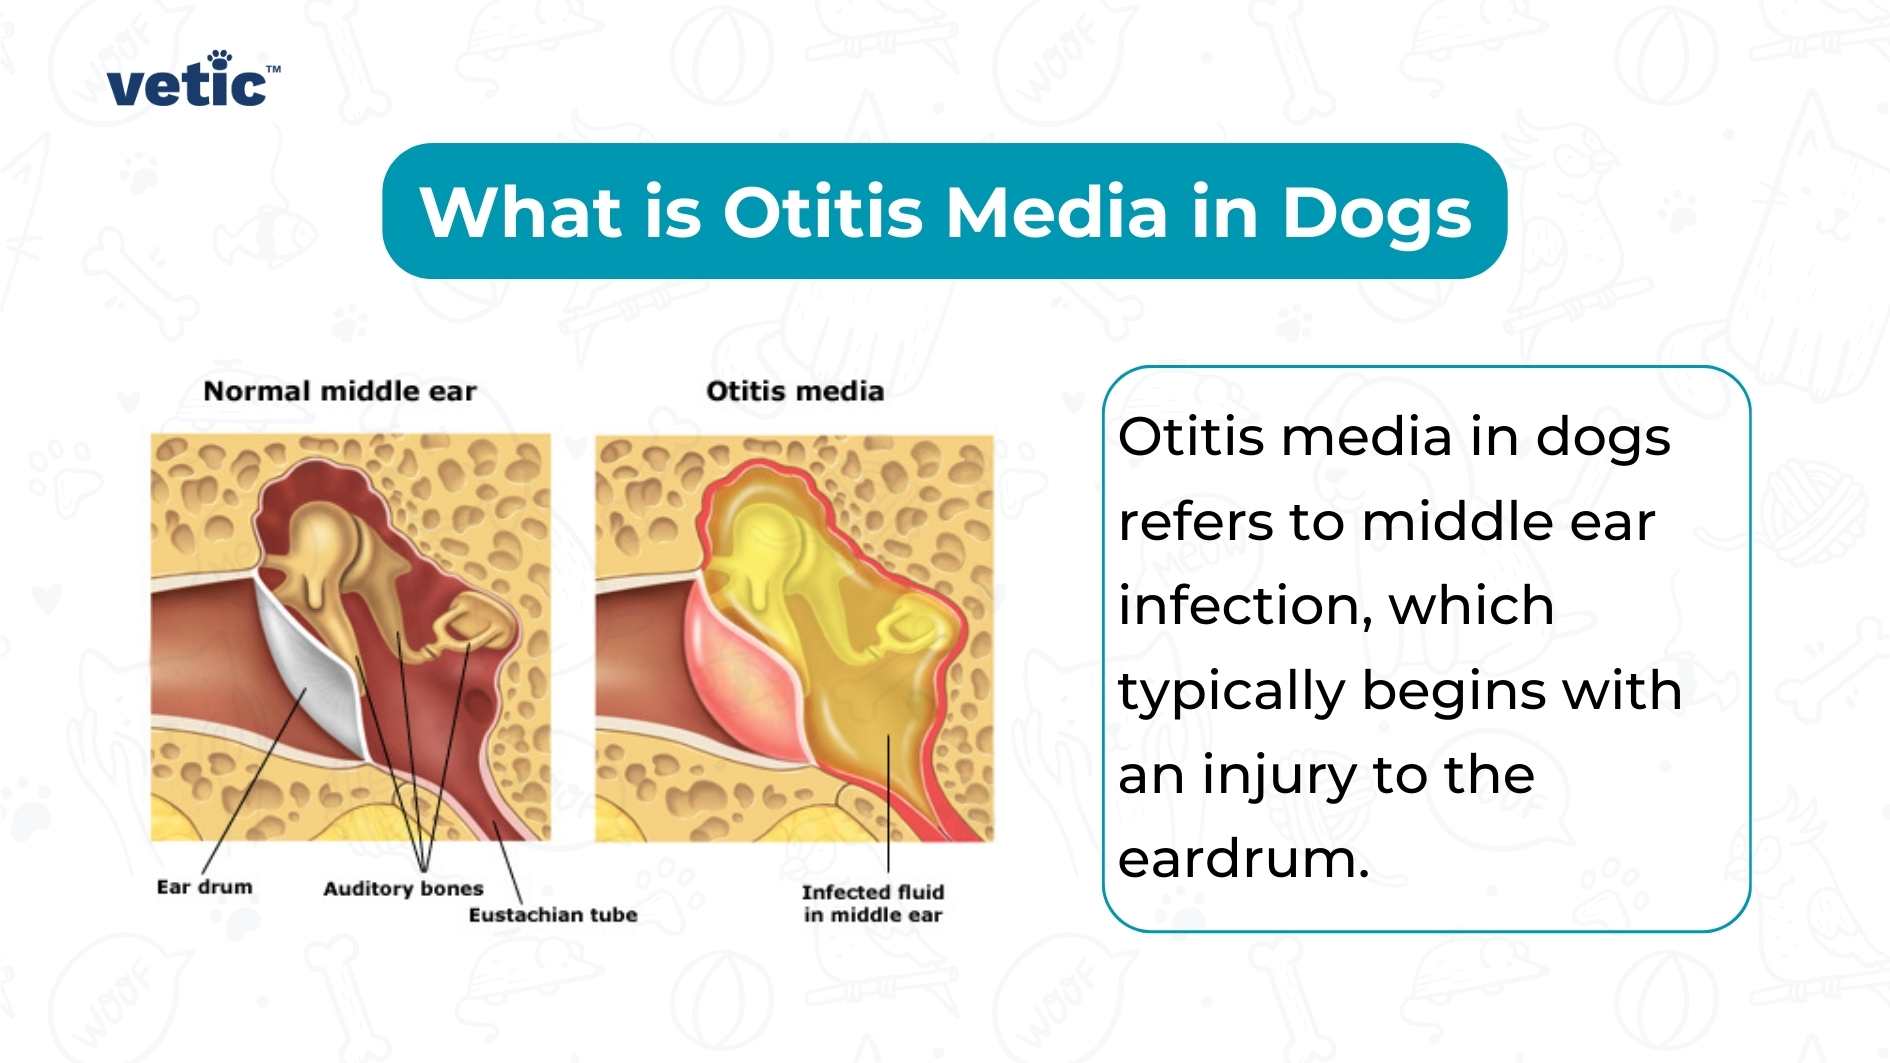 An informative comparison image of a normal middle ear and one affected by otitis media in dogs. The left side illustrates a healthy ear with labeled parts like the eardrum, auditory bones, and Eustachian tube. The right side shows an inflamed ear highlighted with infected fluid. The image also contains text that reads: ‘Otitis media in dogs refers to middle ear infection, which typically begins with an injury to the eardrum.’